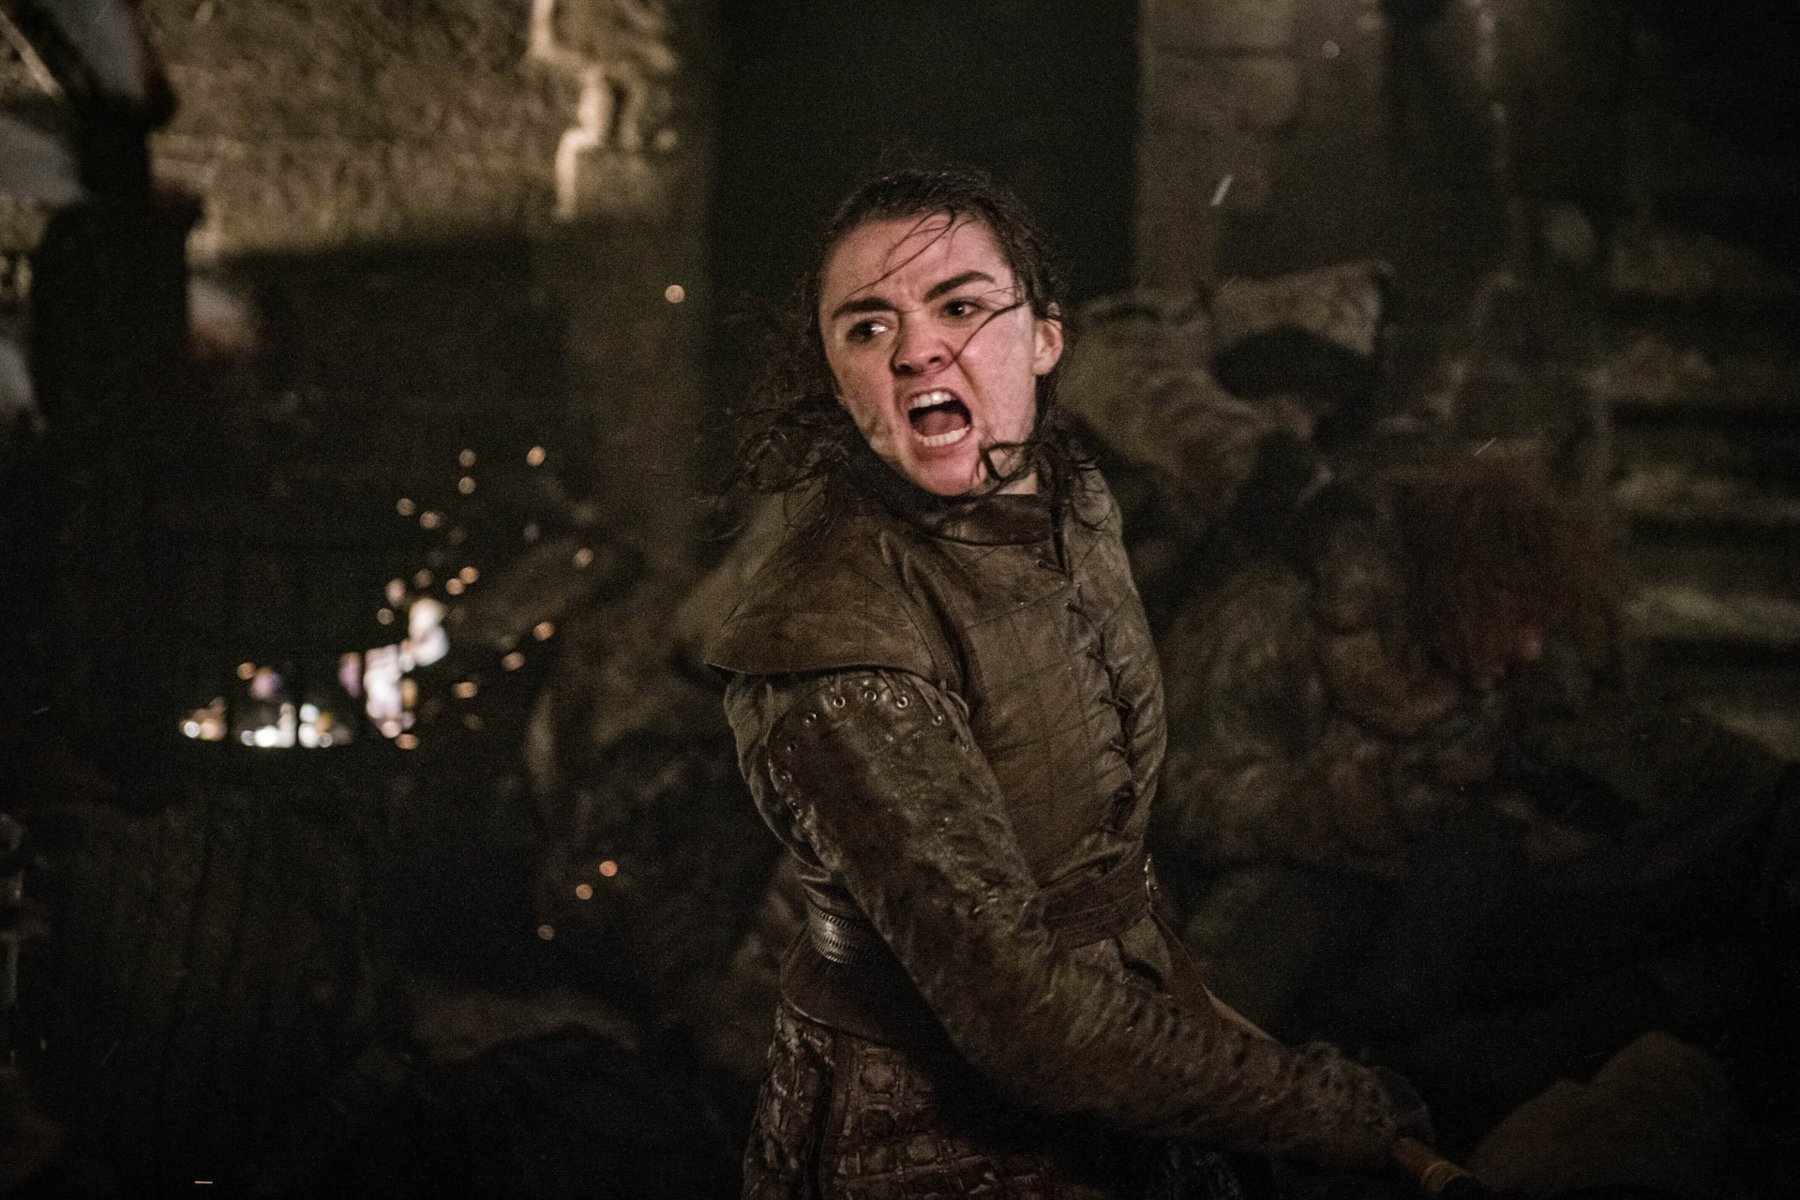 Maisie Williams as Arya Stark for our article about potential 'Game of Thrones' spinoffs. She's fighting in the battle of Winterfell, and something is on fire behind her.